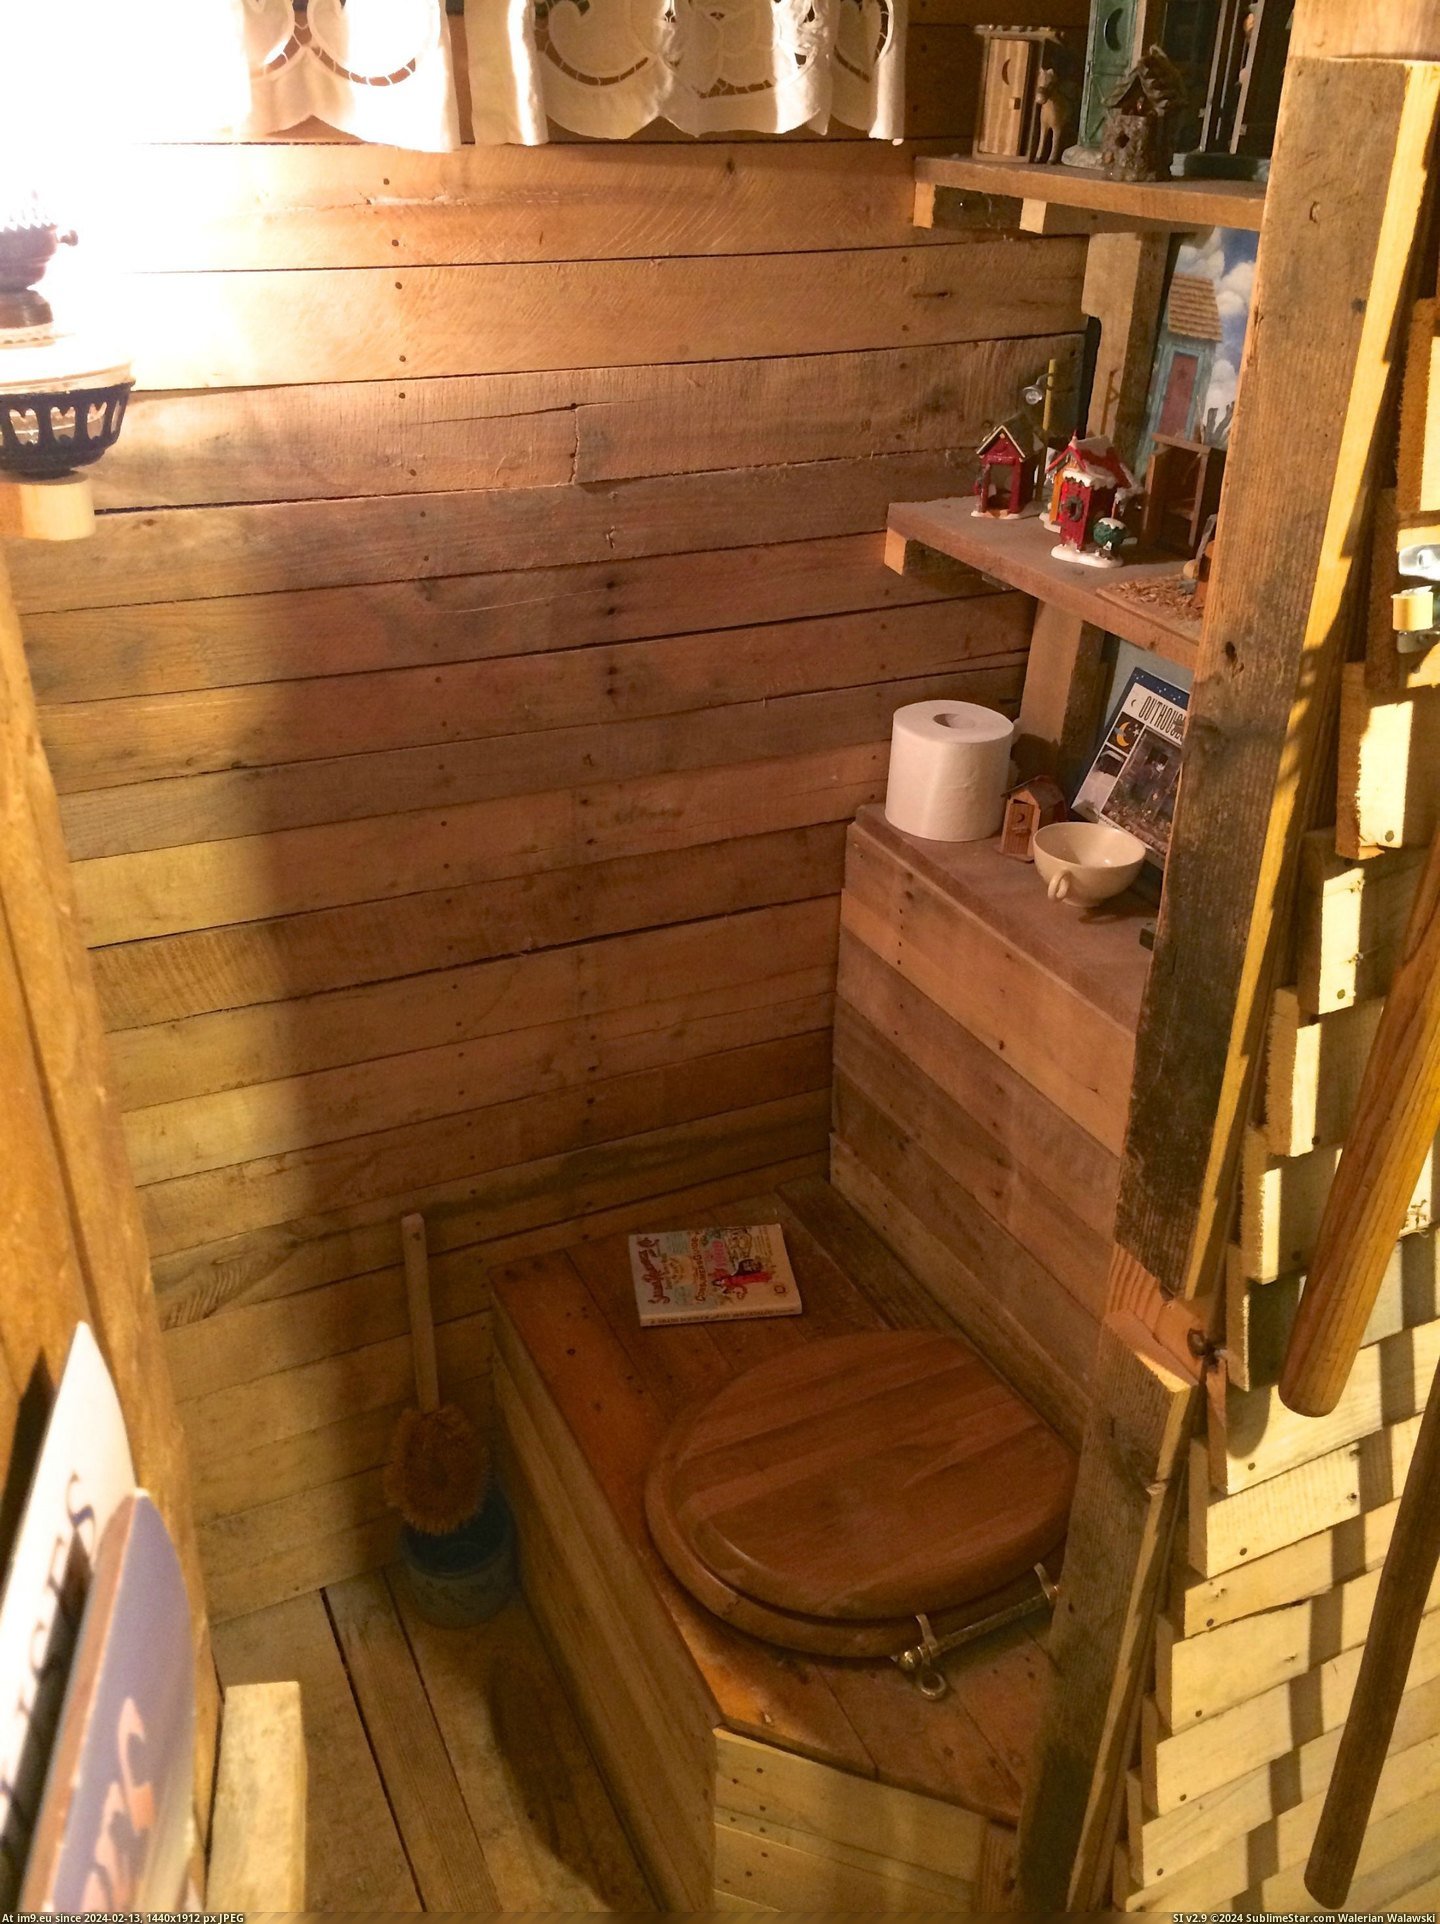 #Guys #Dad #Isn #Basement #Told #Built [Pics] My dad isn't on Reddit, but I told him you guys would appreciate the outhouse he built in their basement. 8 Pic. (Изображение из альбом My r/PICS favs))